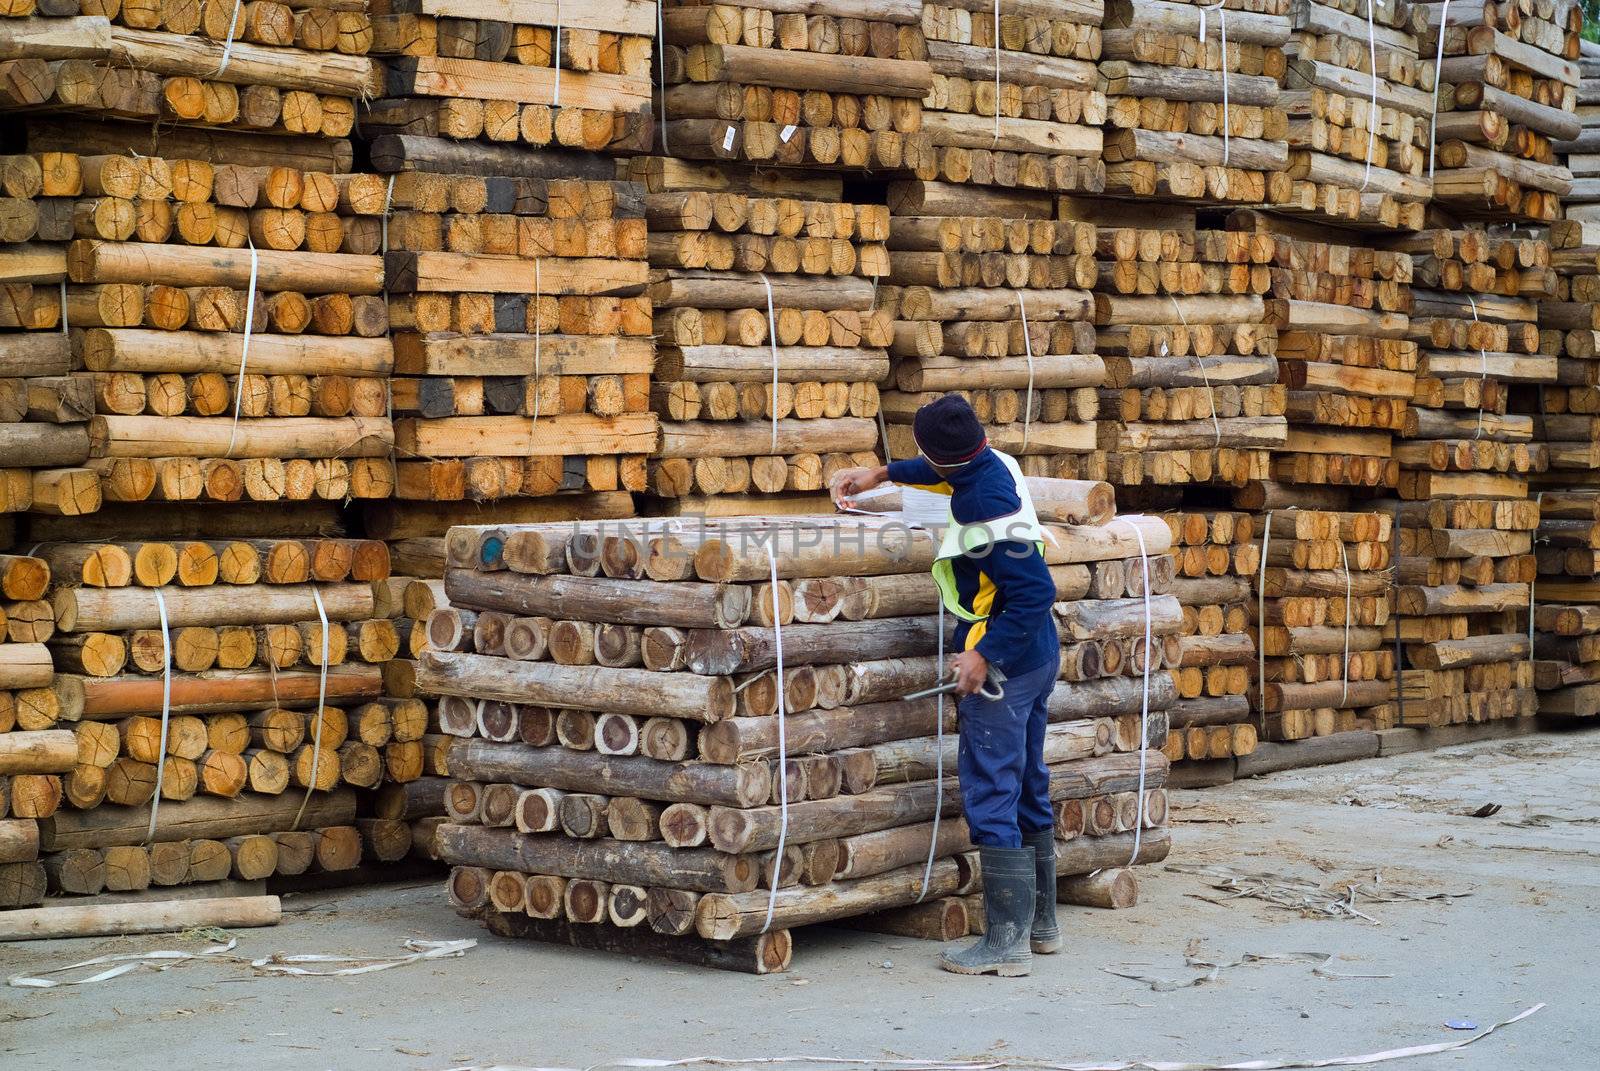 Factory or industry worker, employee stacking timber for shipping